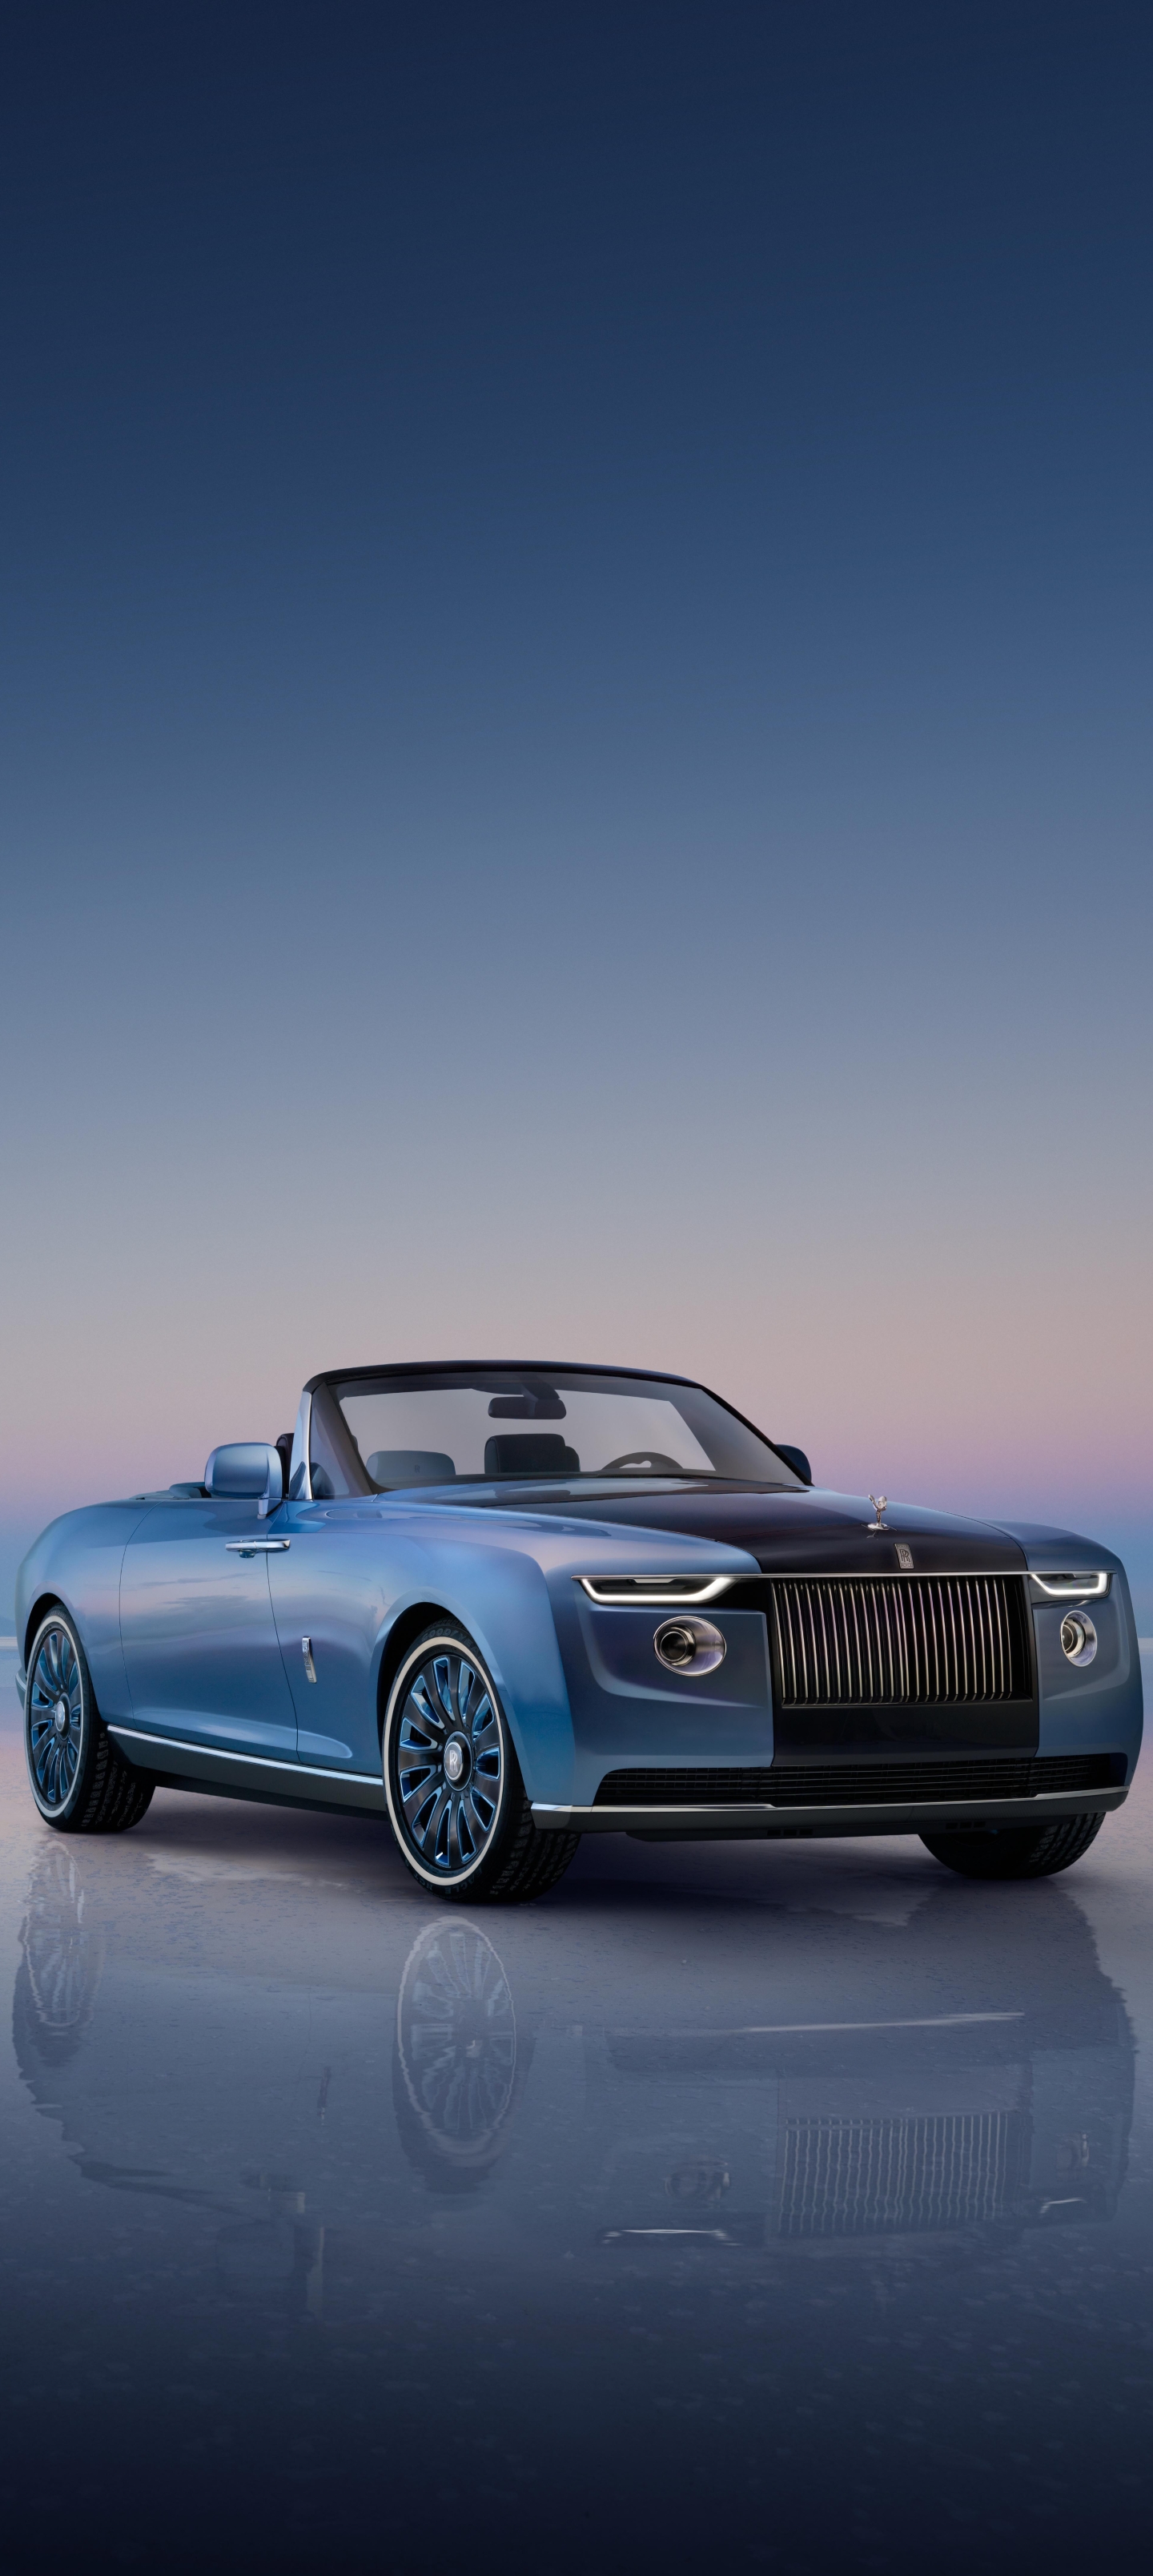 Rolls-Royce Boat Tail Phone Wallpaper - Mobile Abyss